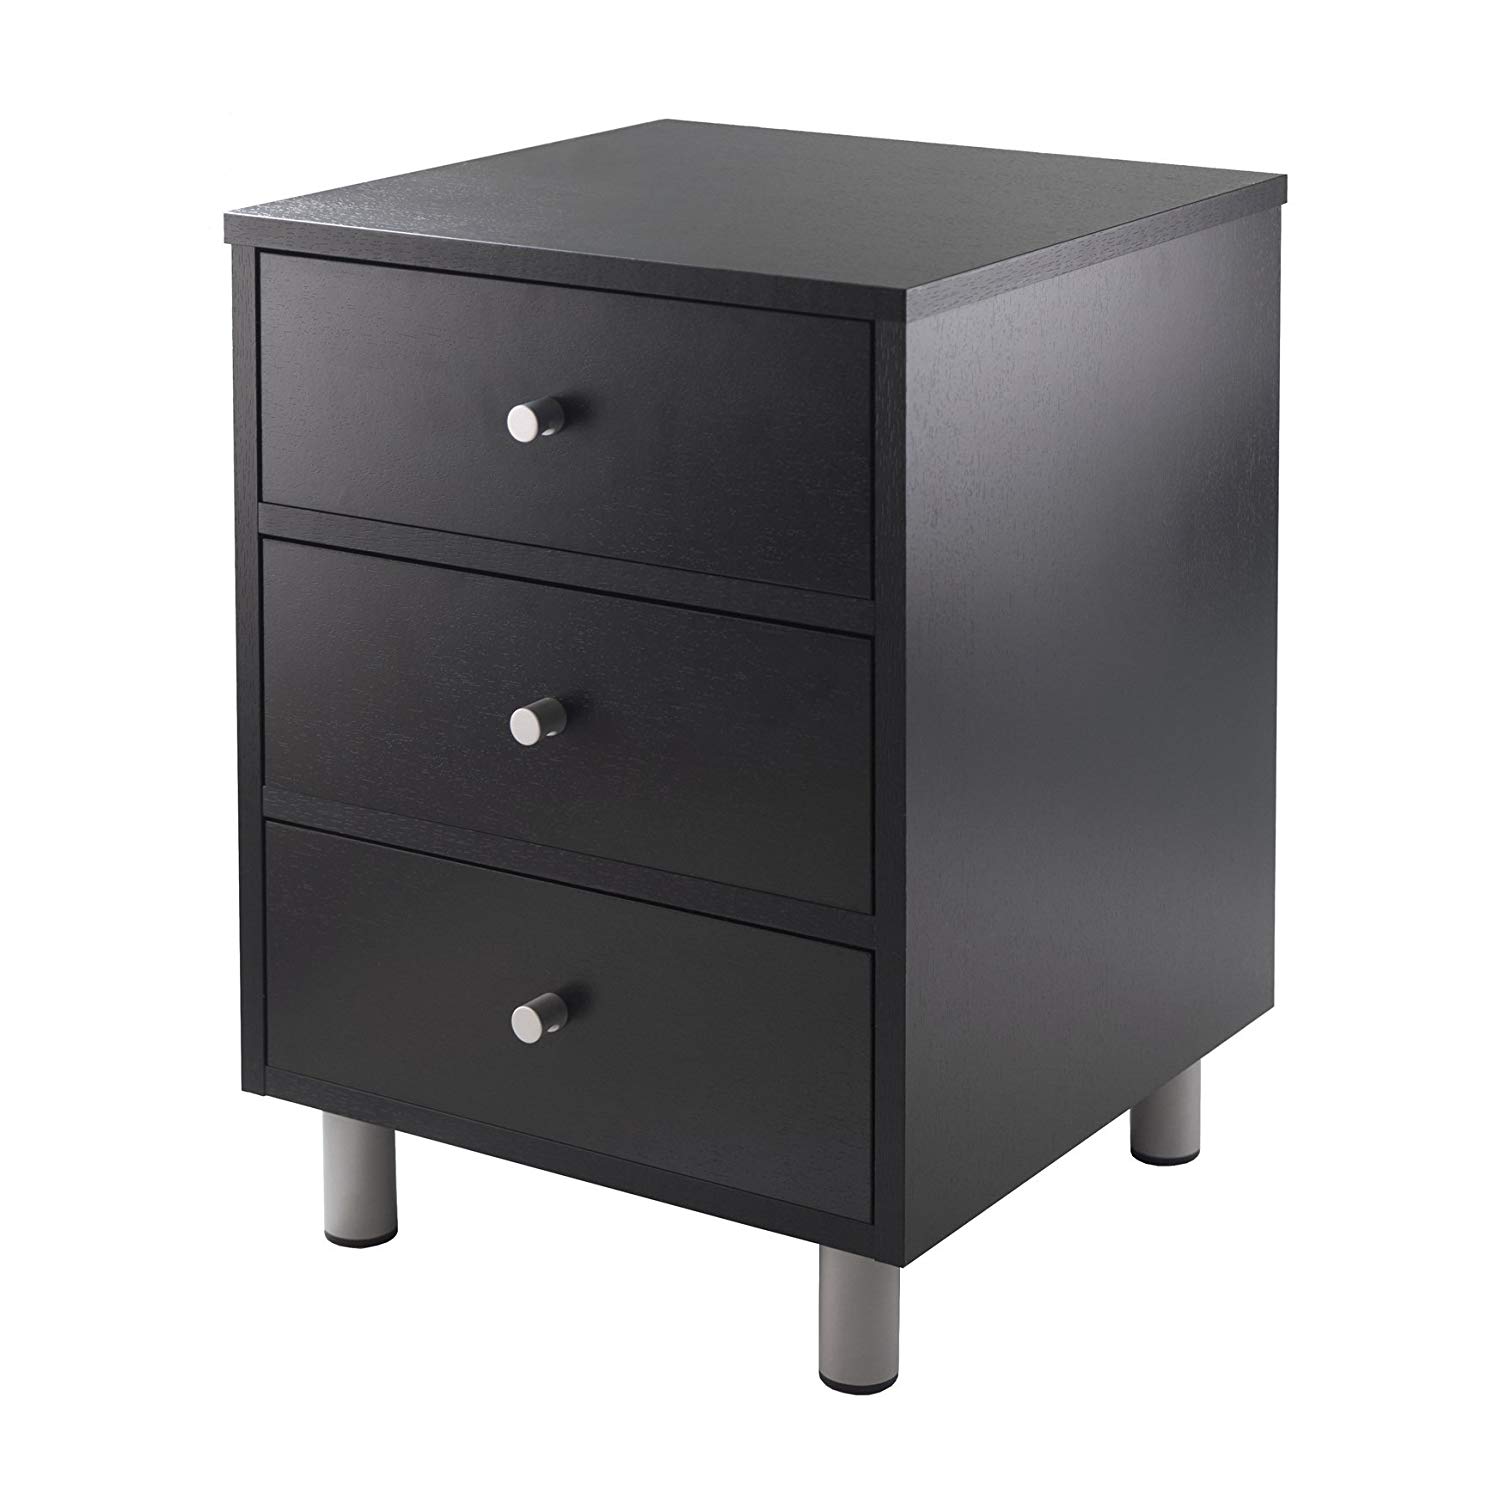 winsome daniel accent table with drawer black finish room essentials instructions kitchen dining silver drum bedroom night tables small industrial end pier one curtains round